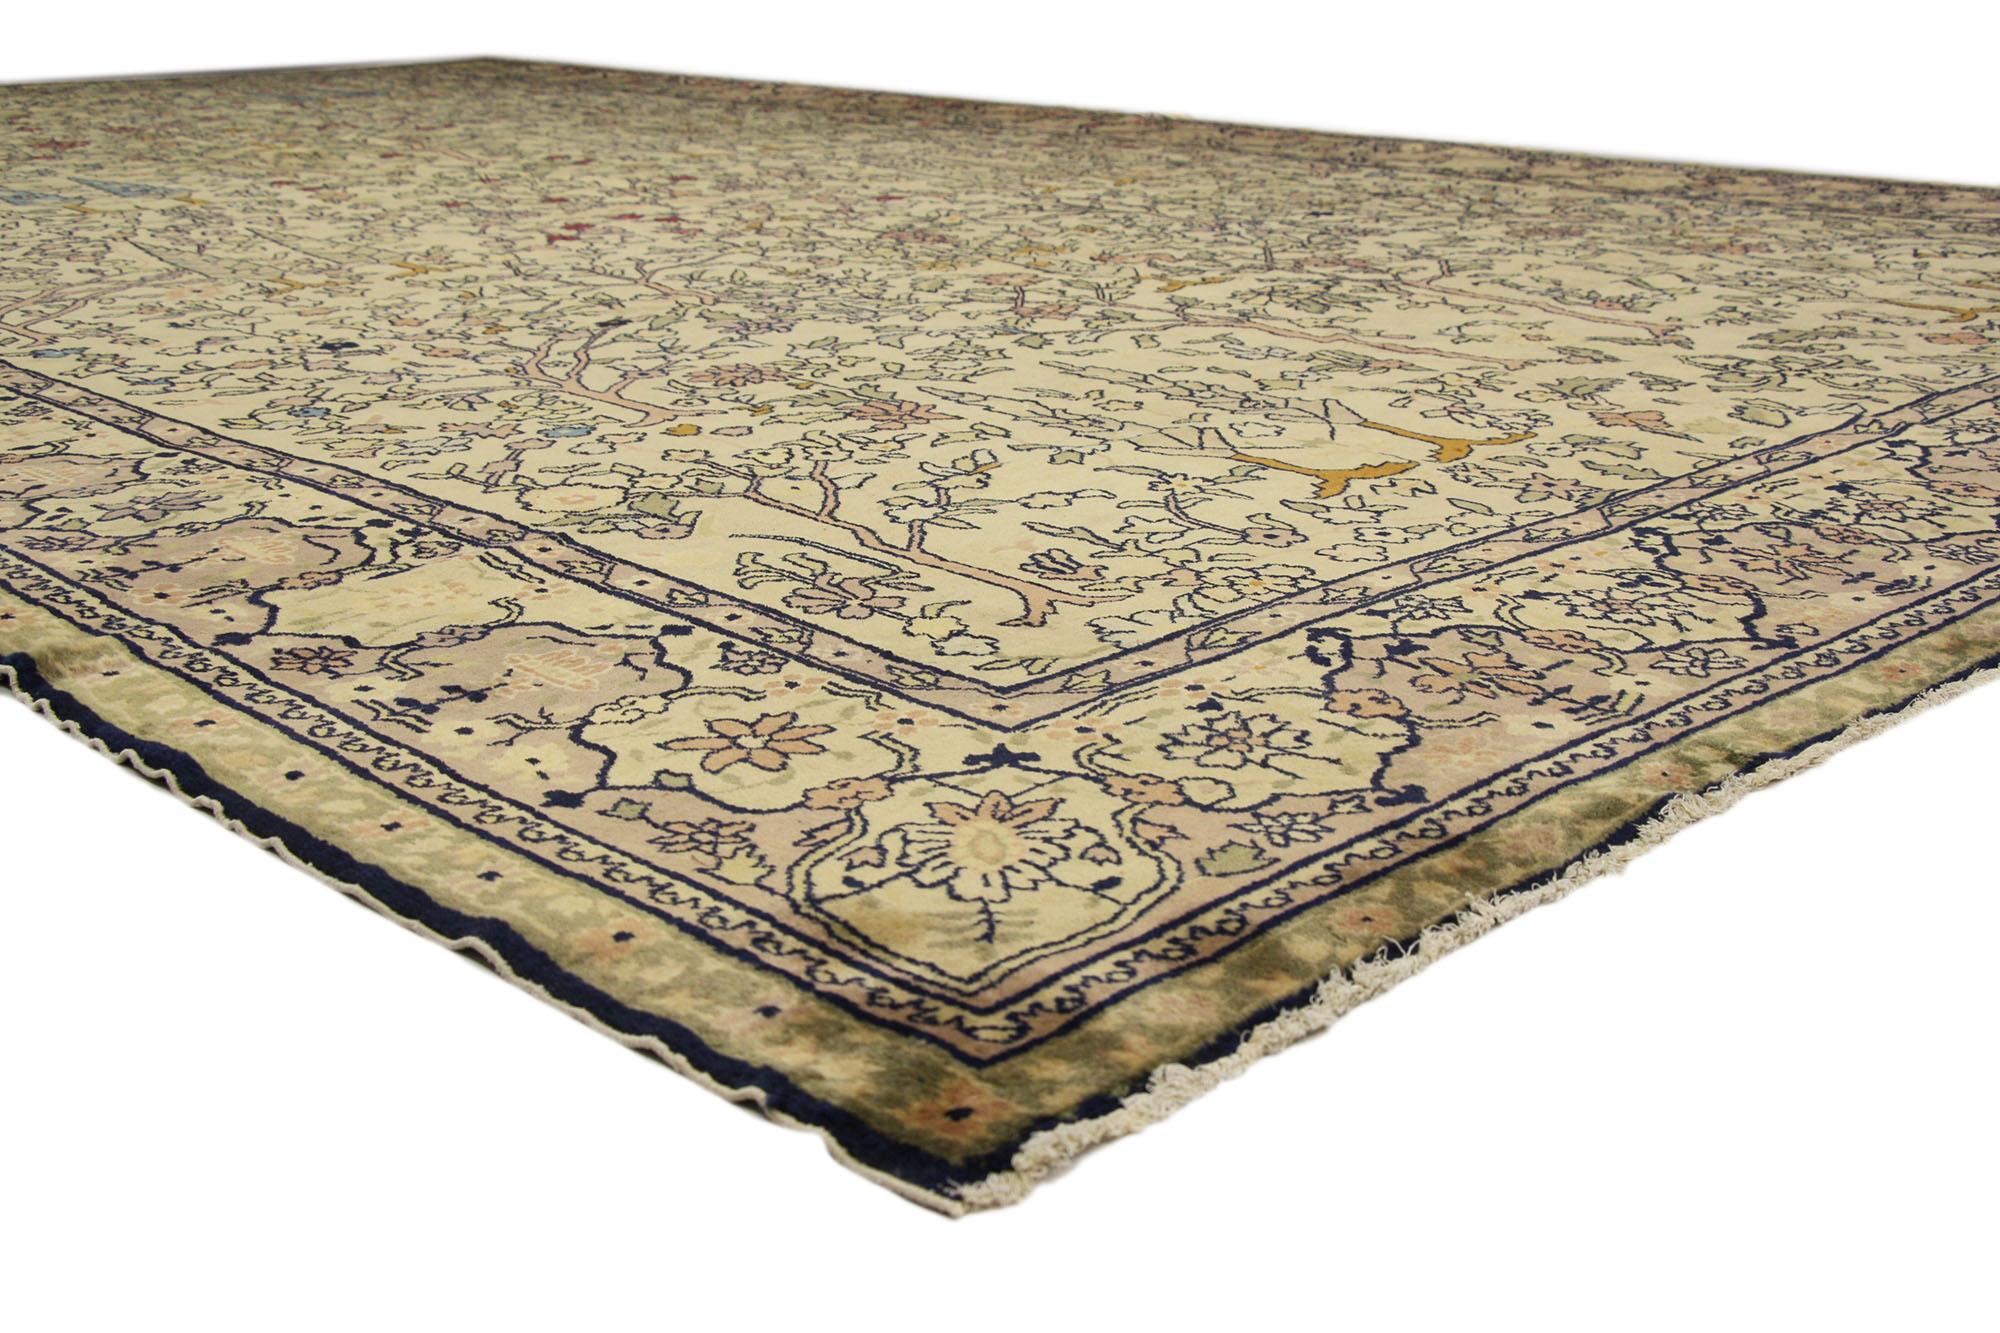 72912 Antique Indian Agra Rug, 11’03 x 19’00.
Emanating nostalgic charm with incredible detail and texture, this oversized antique Indian Agra rug is poised to impress. The decorative allover pattern and soft pastel earth-tone colors woven into this